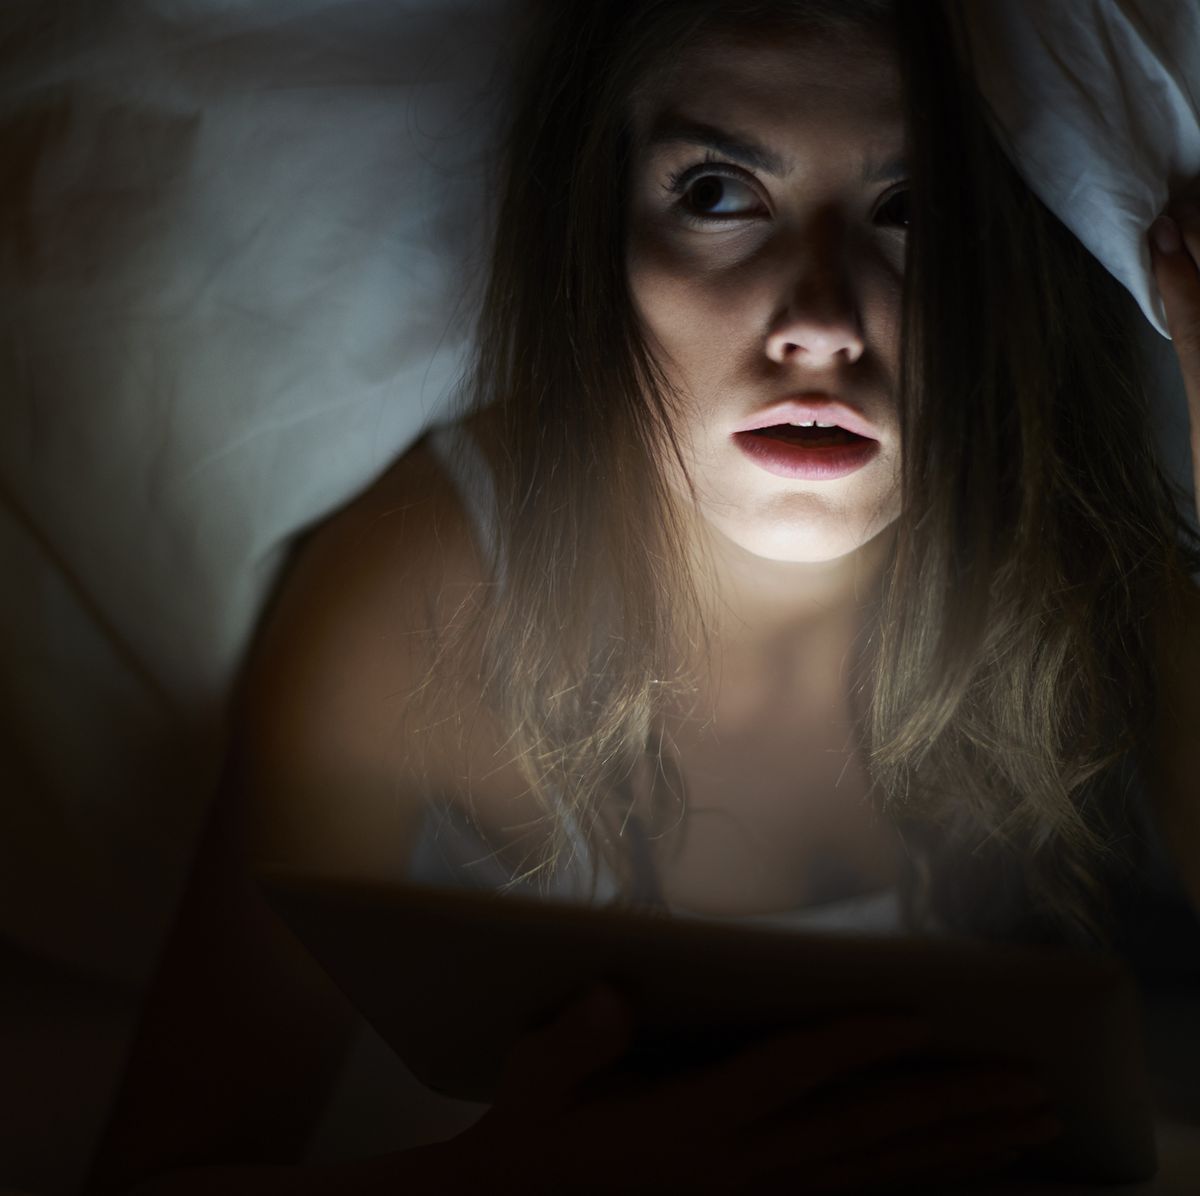 Ask Amy: Nighttime can be scary, even for adults